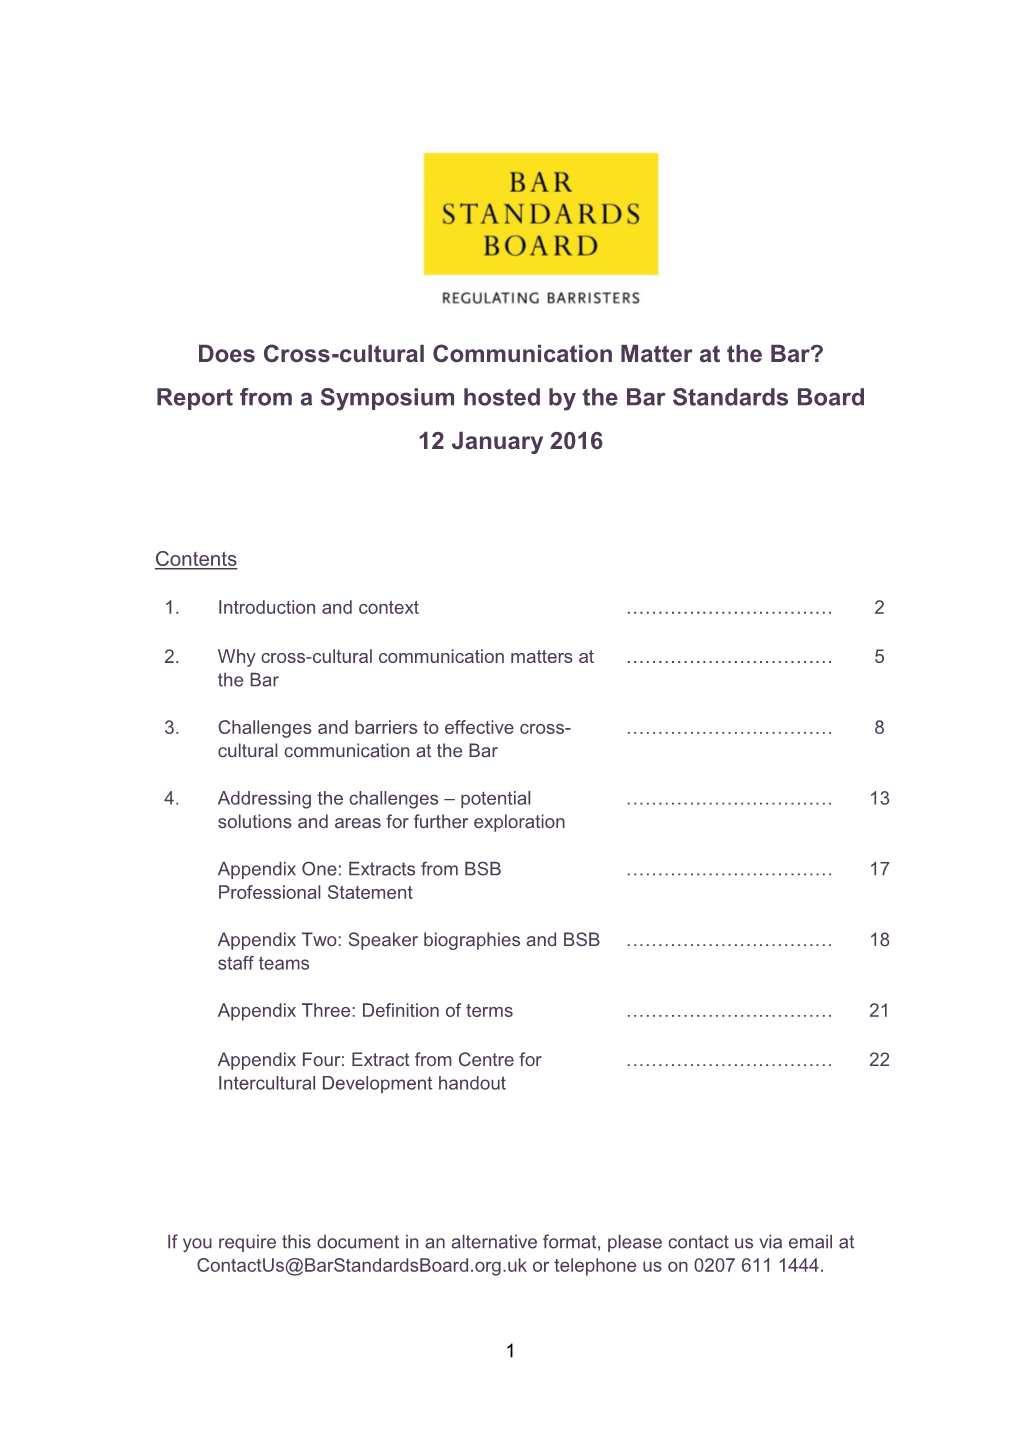 Does Cross-Cultural Communication Matter at the Bar? Report from a Symposium Hosted by the Bar Standards Board 12 January 2016